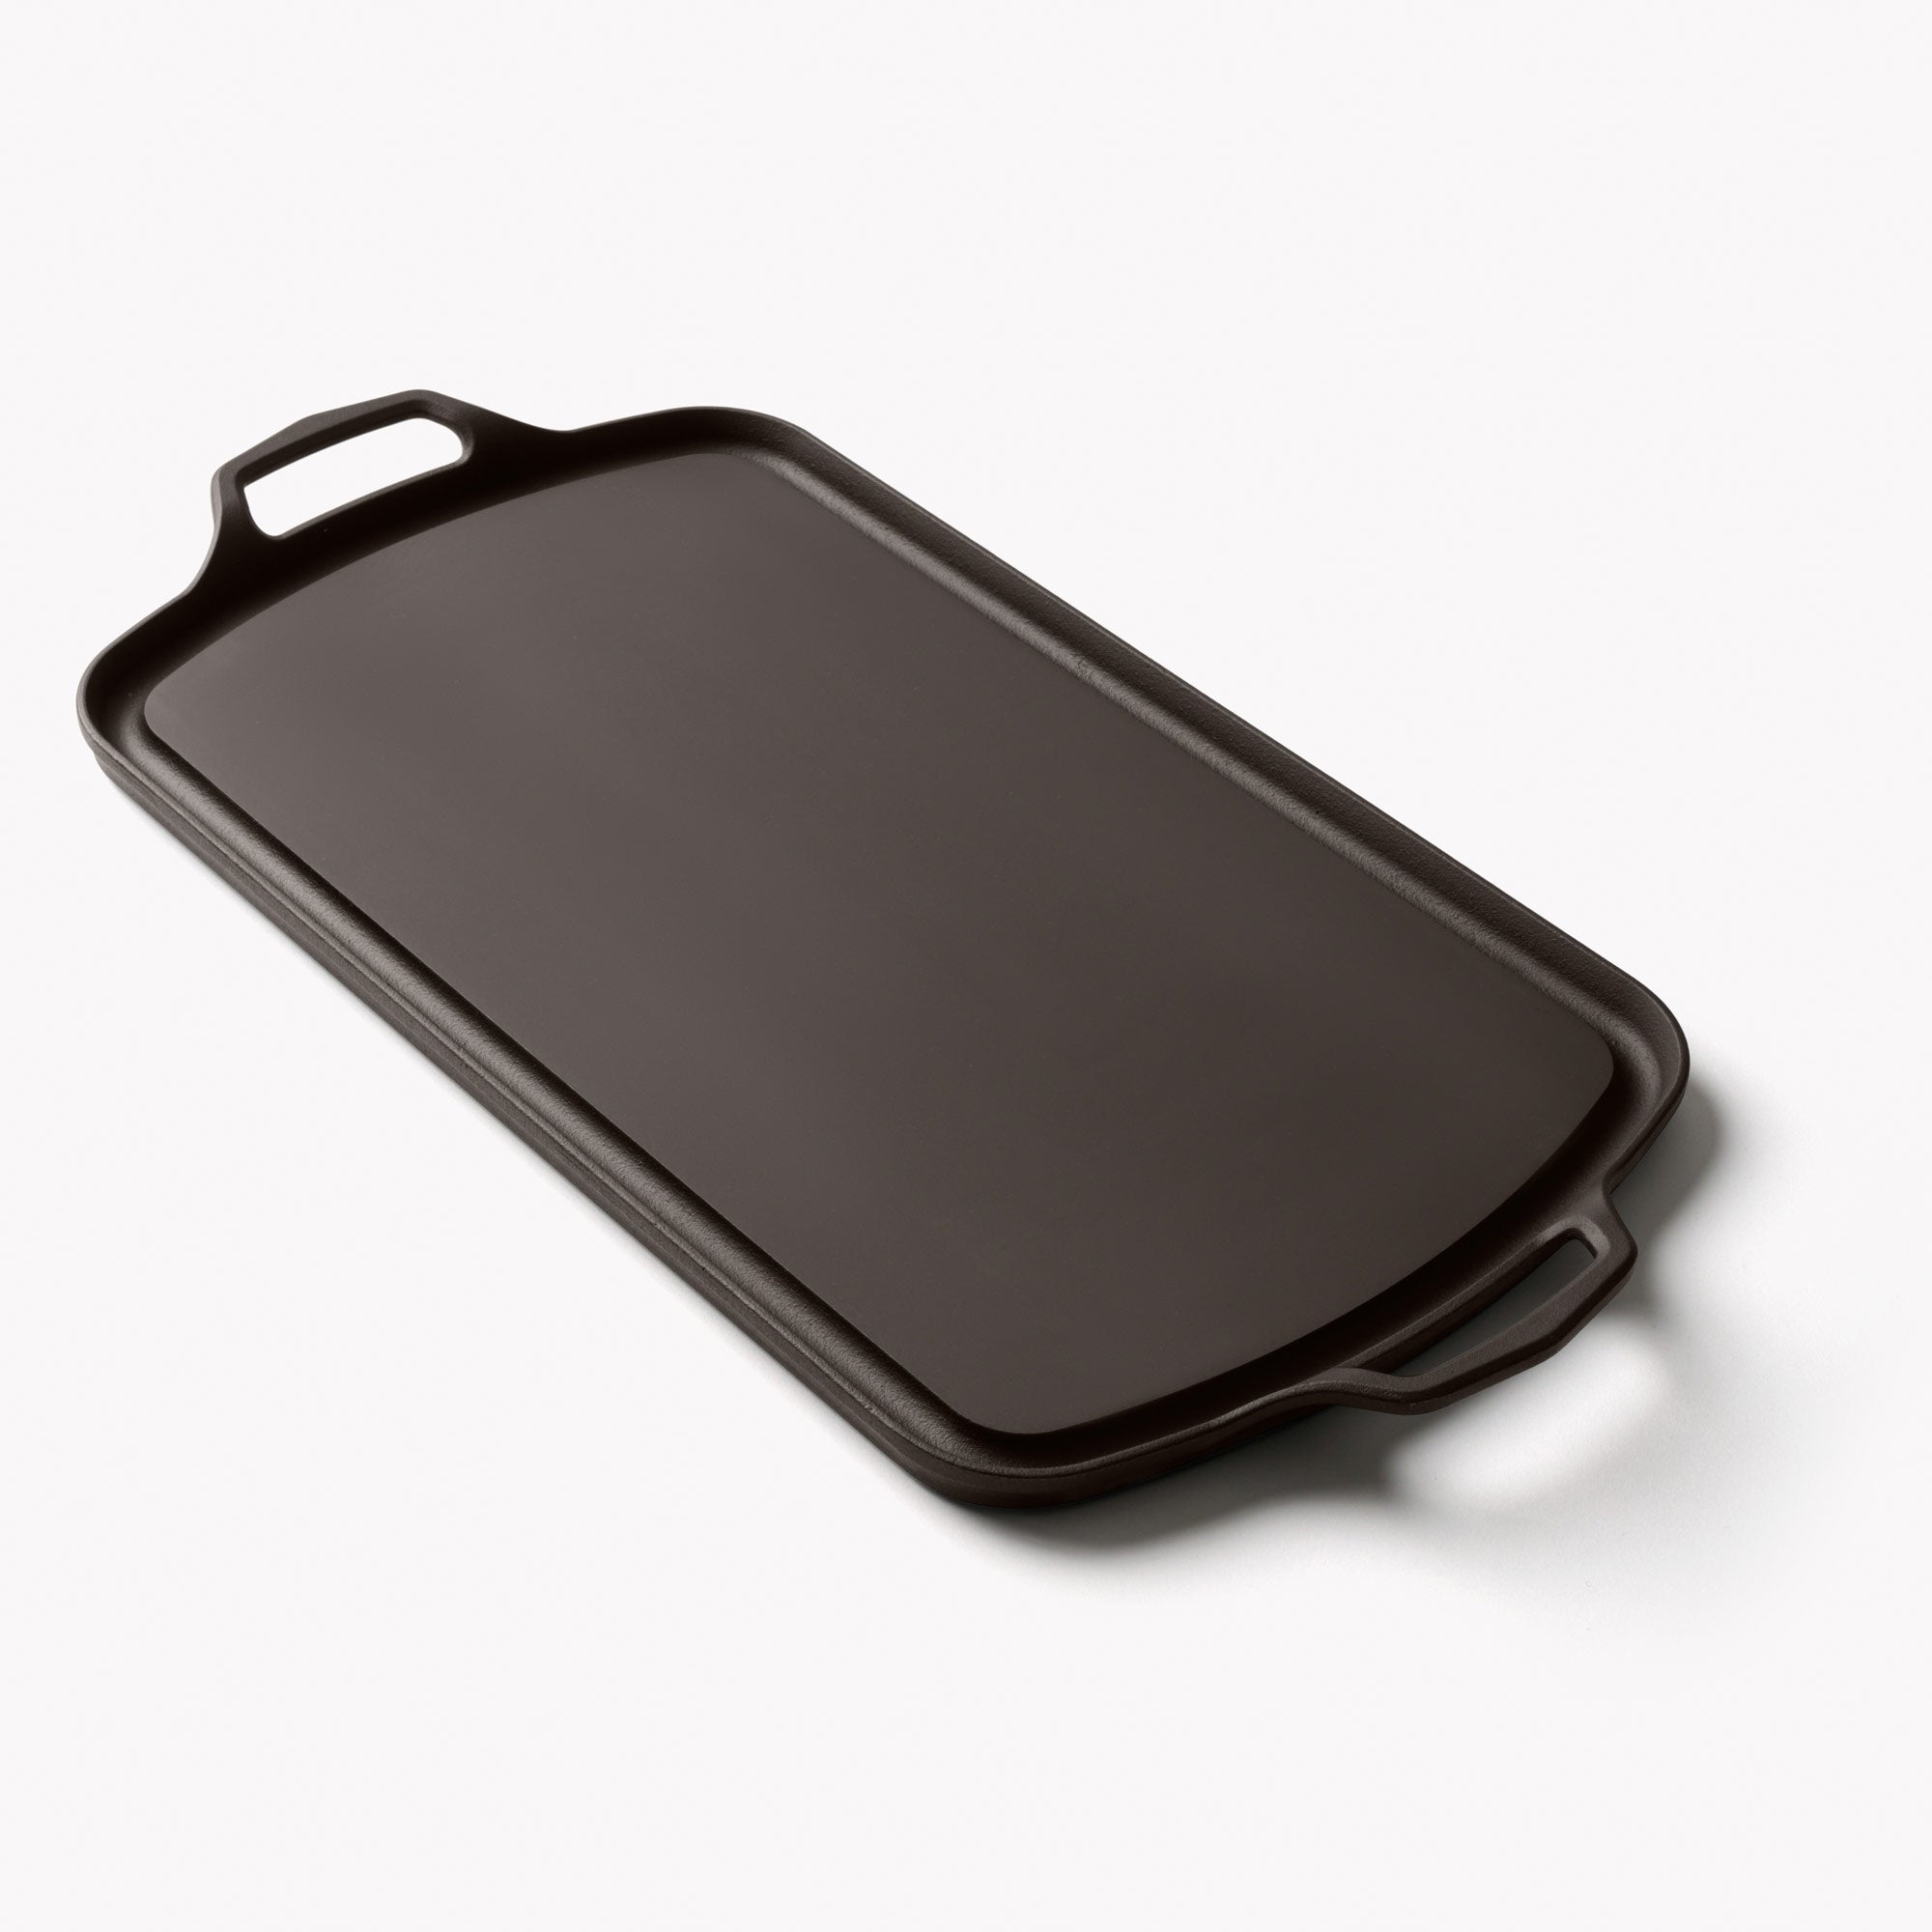 Long Cast Iron Griddle – Field Company